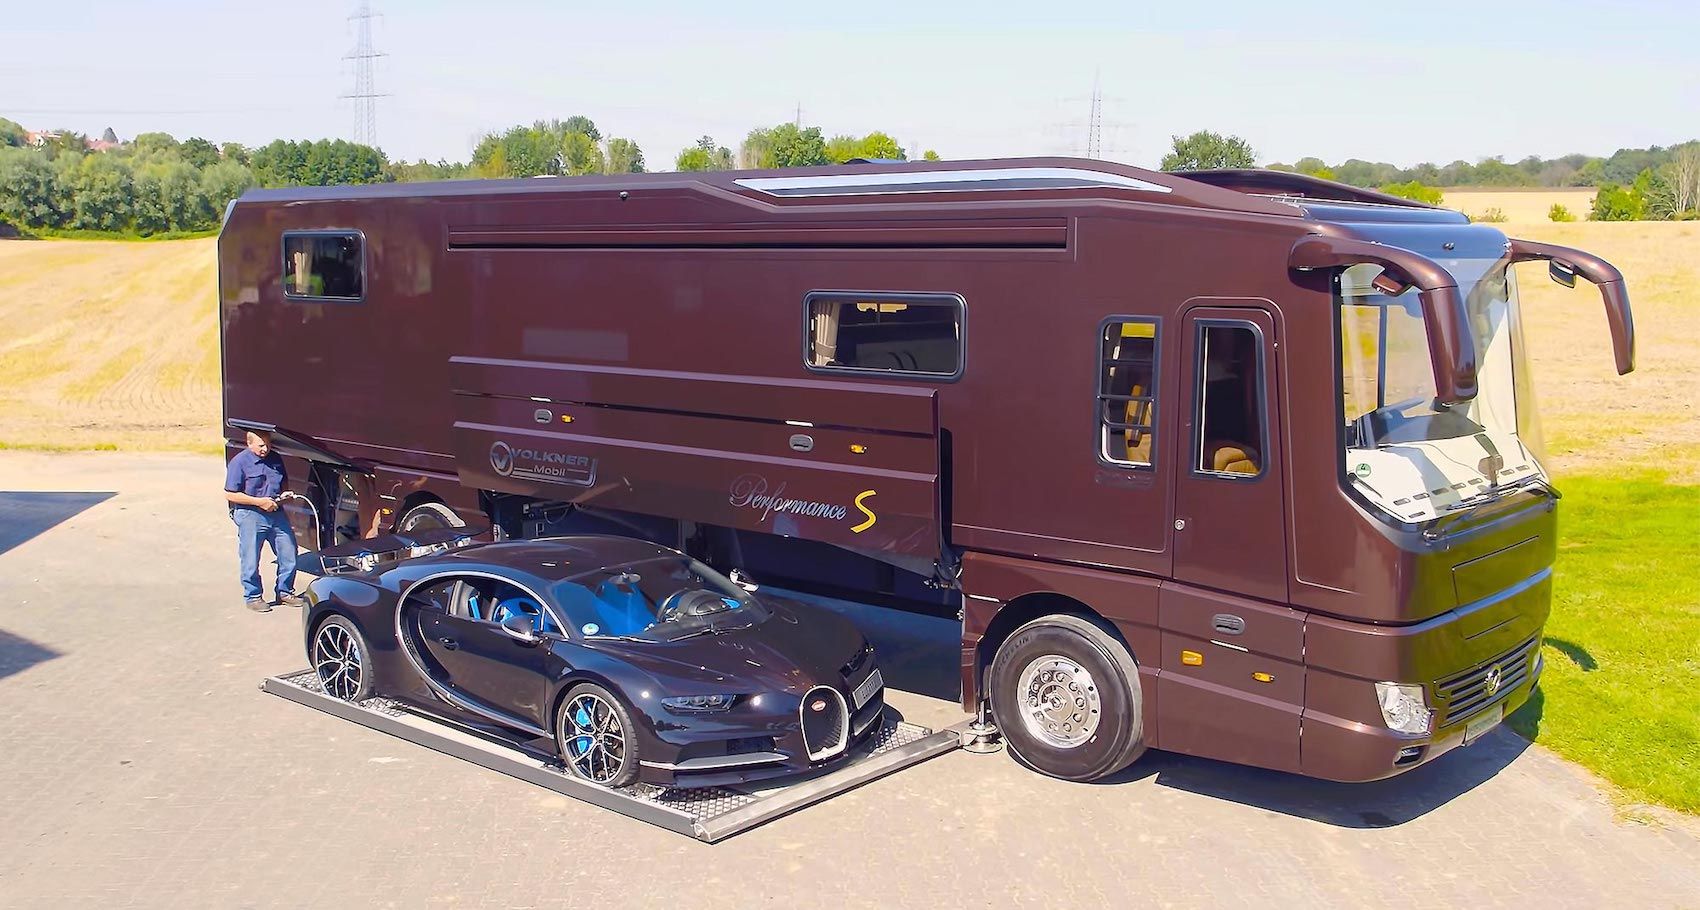 2021-Volkner-Mobil-Performance-S-Motorhome-Featured-image